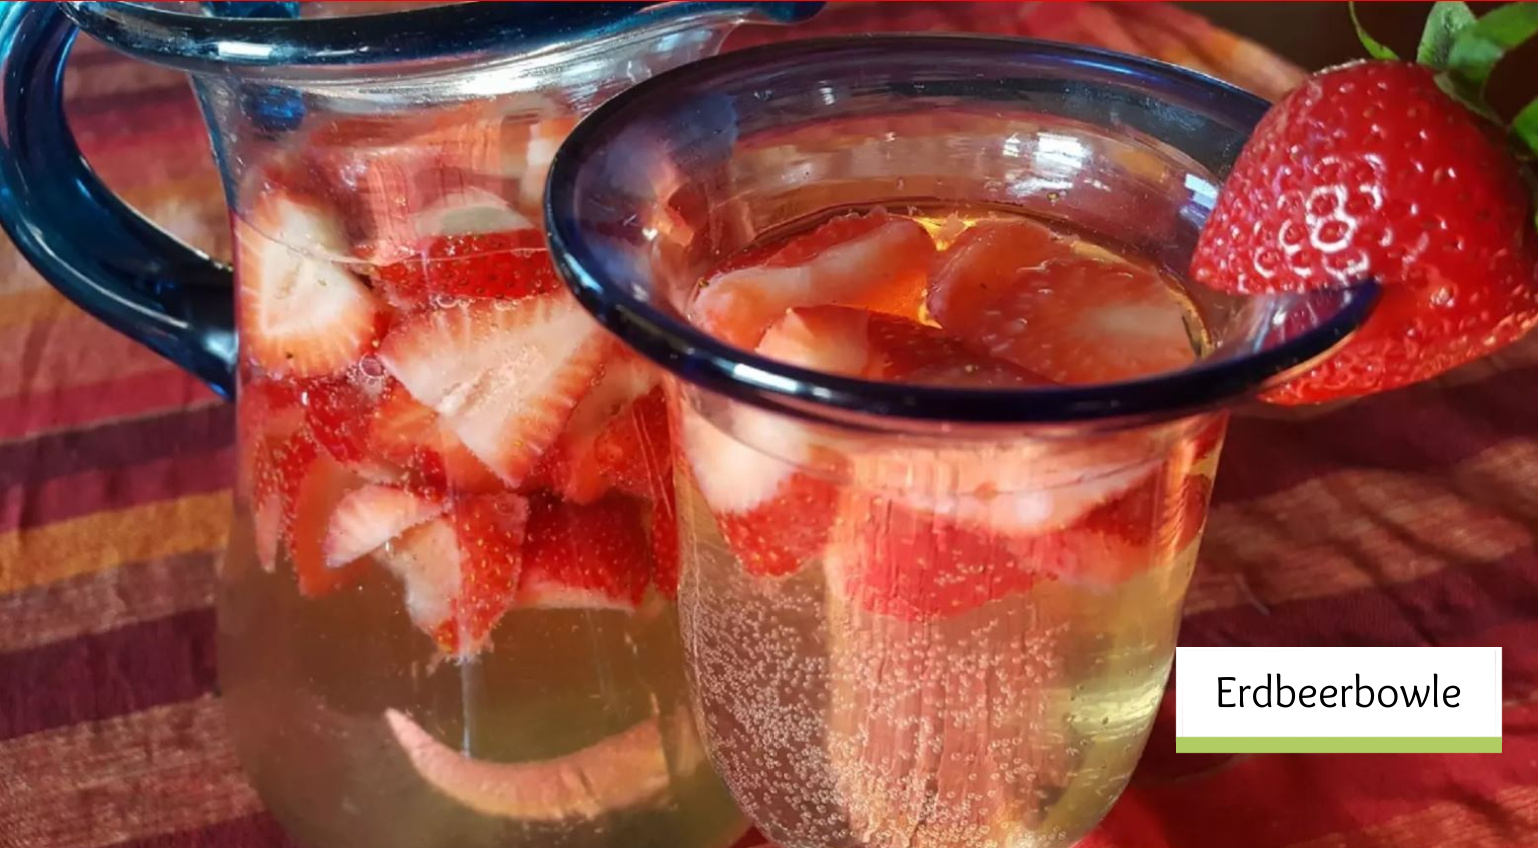 Erdbeerbowle – A Refreshing Summer Strawberry and Wine Punch